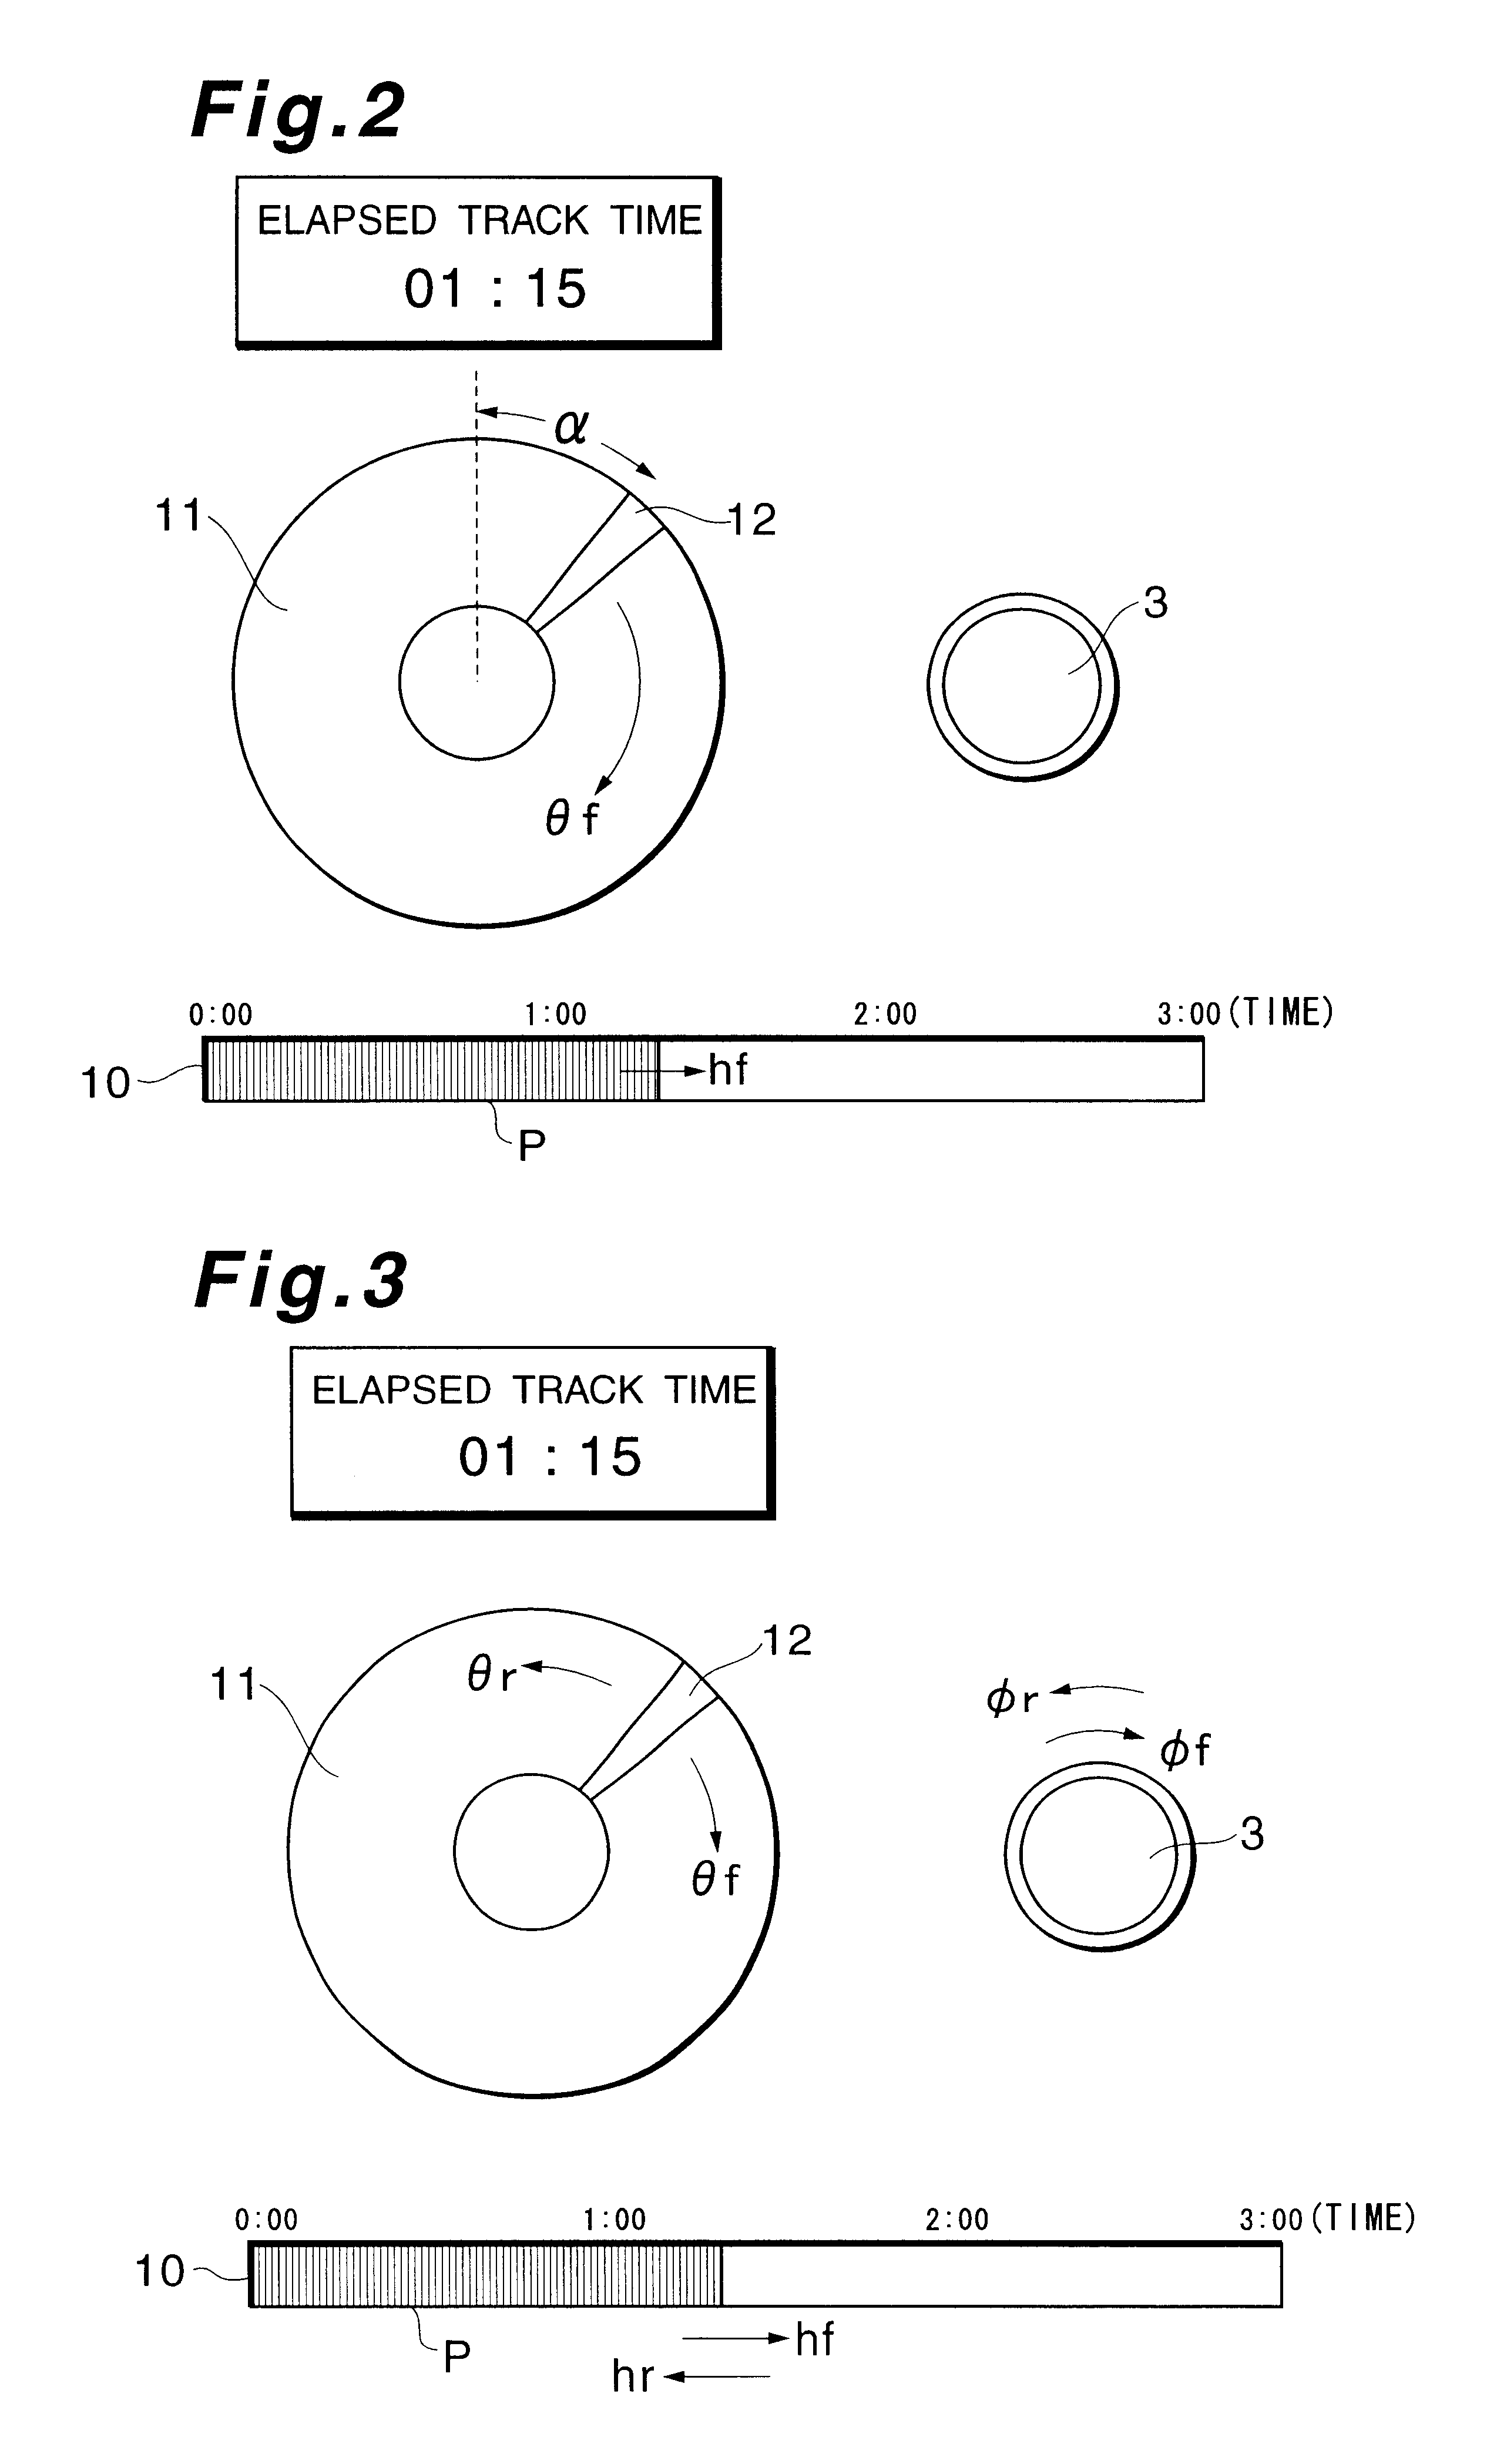 Playback apparatus for displaying angular position based on remainder corresponding to elapsed time